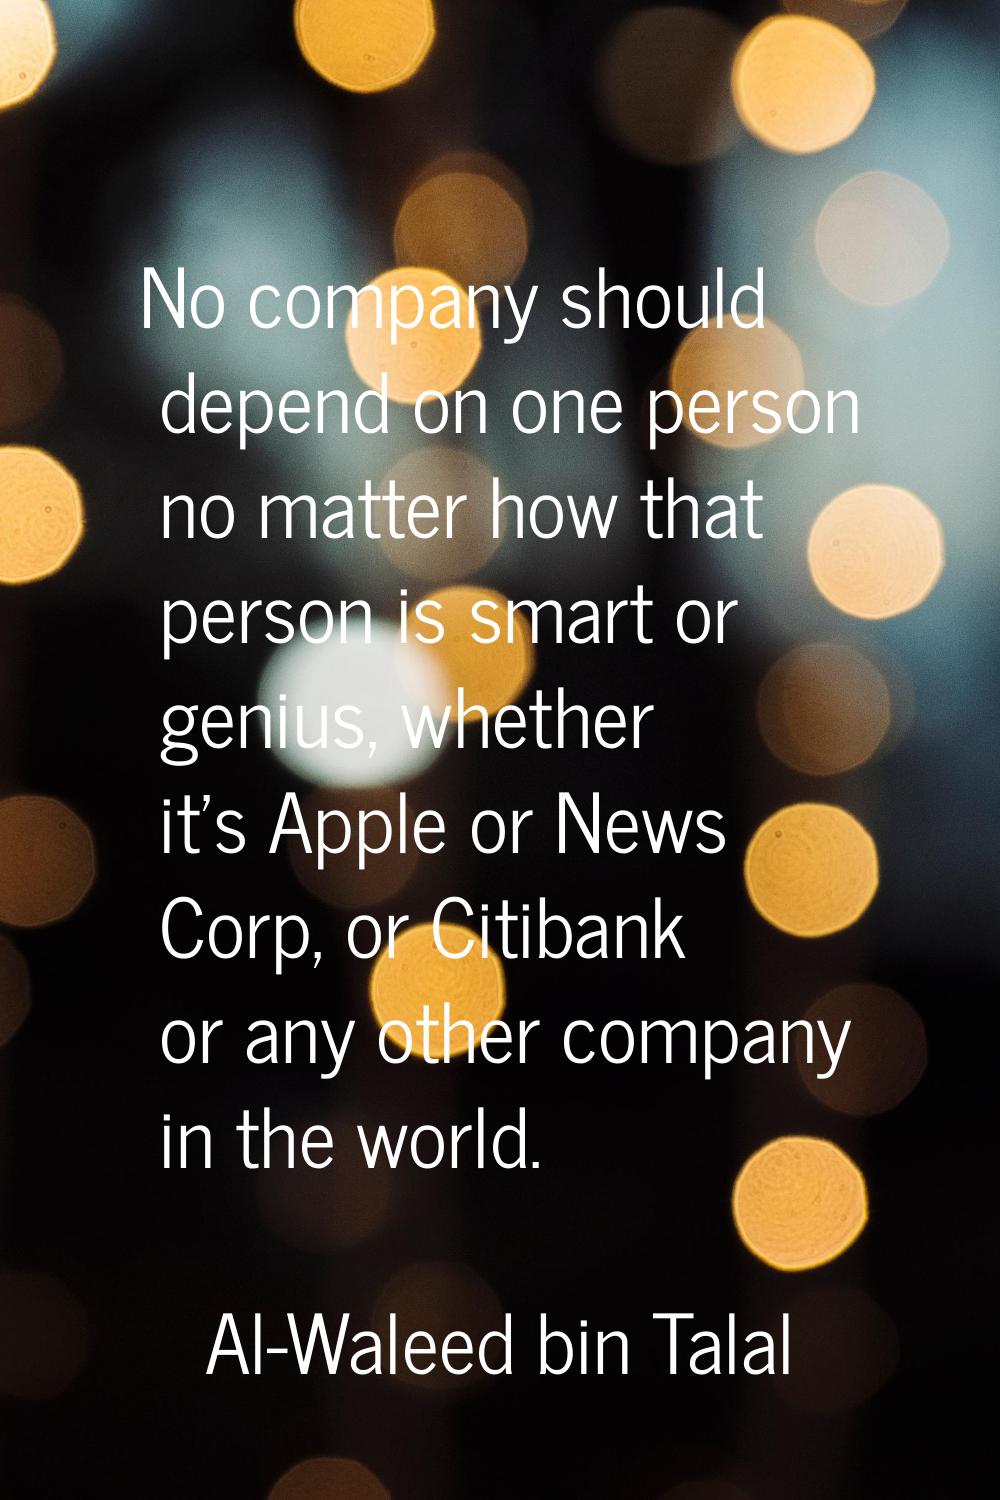 No company should depend on one person no matter how that person is smart or genius, whether it's A